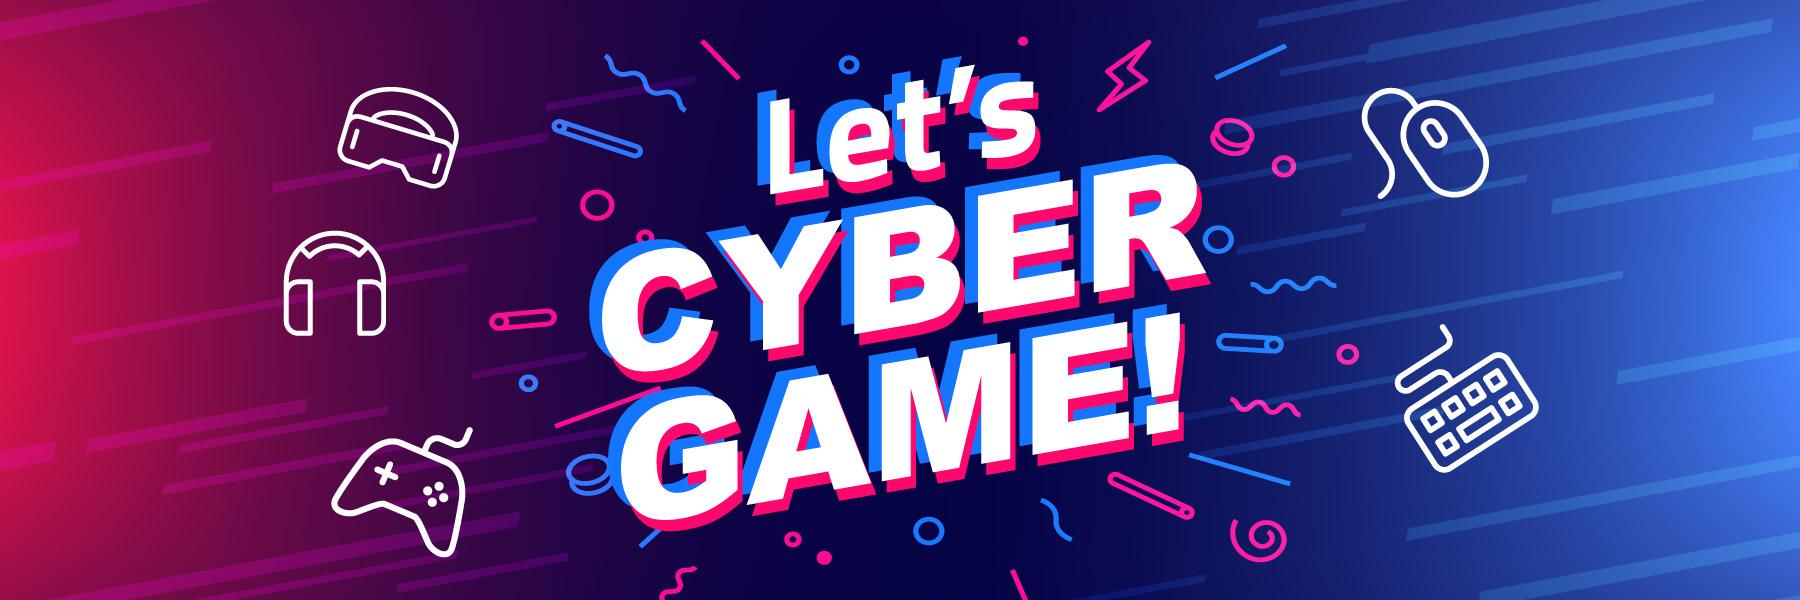 MIMIT: Let’s Cyber Game